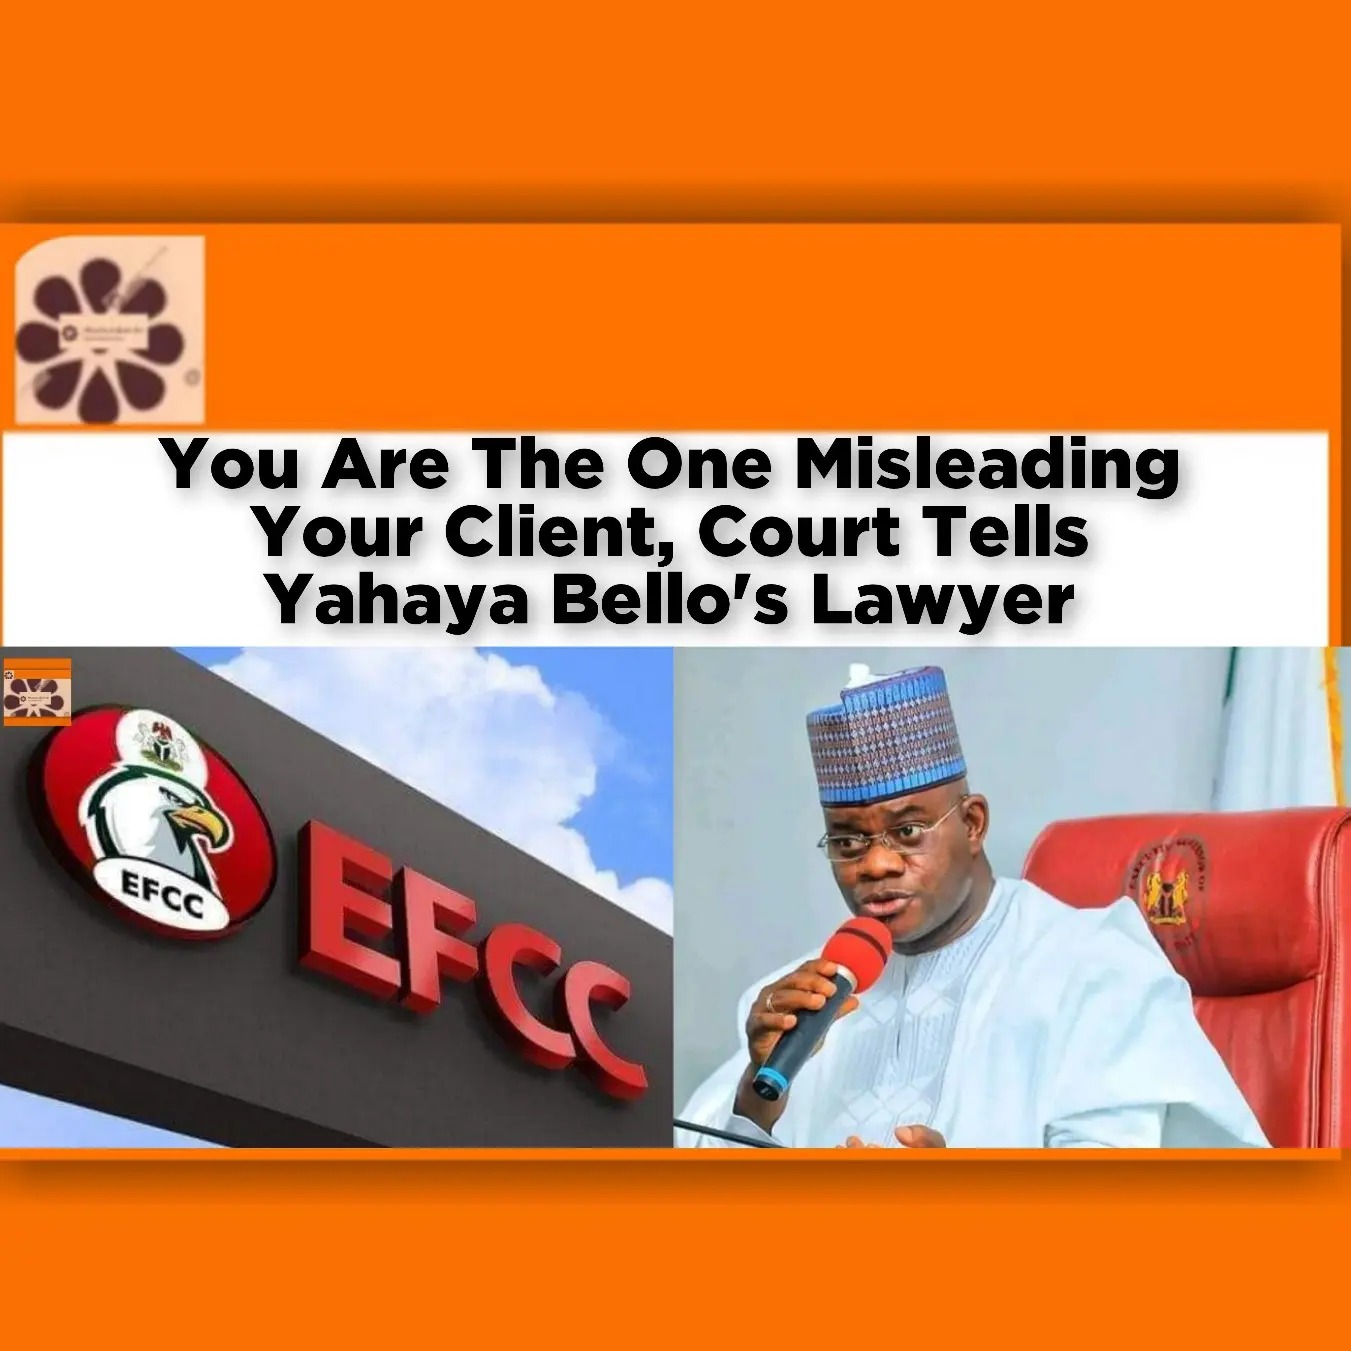 You Are The One Misleading Your Client, Court Tells Yahaya Bello's Lawyer ~ OsazuwaAkonedo #Omirhobo